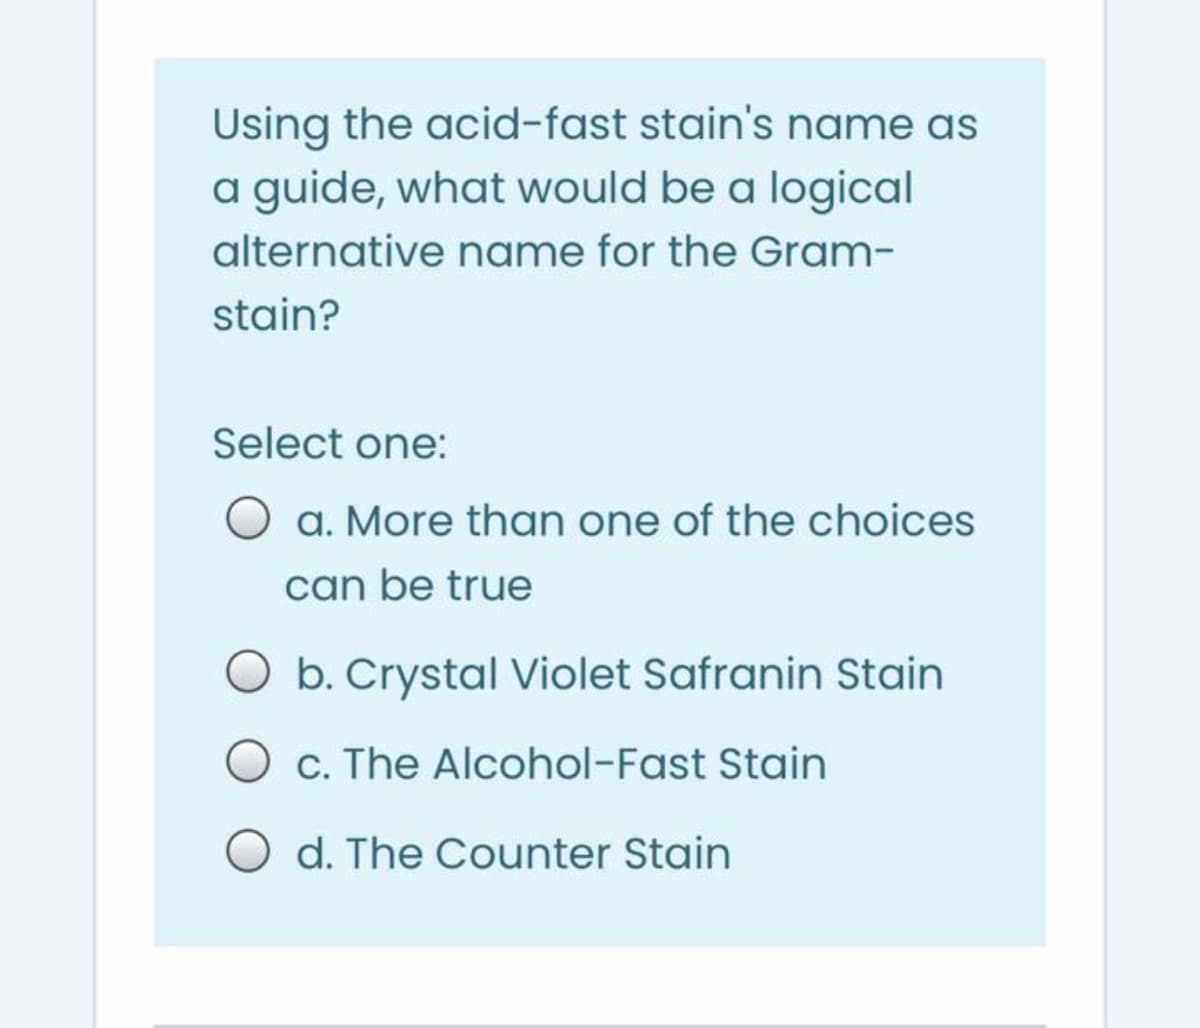 Using the acid-fast stain's name as
a guide, what would be a logical
alternative name for the Gram-
stain?
Select one:
a. More than one of the choices
can be true
O b. Crystal Violet Safranin Stain
c. The Alcohol-Fast Stain
d. The Counter Stain
